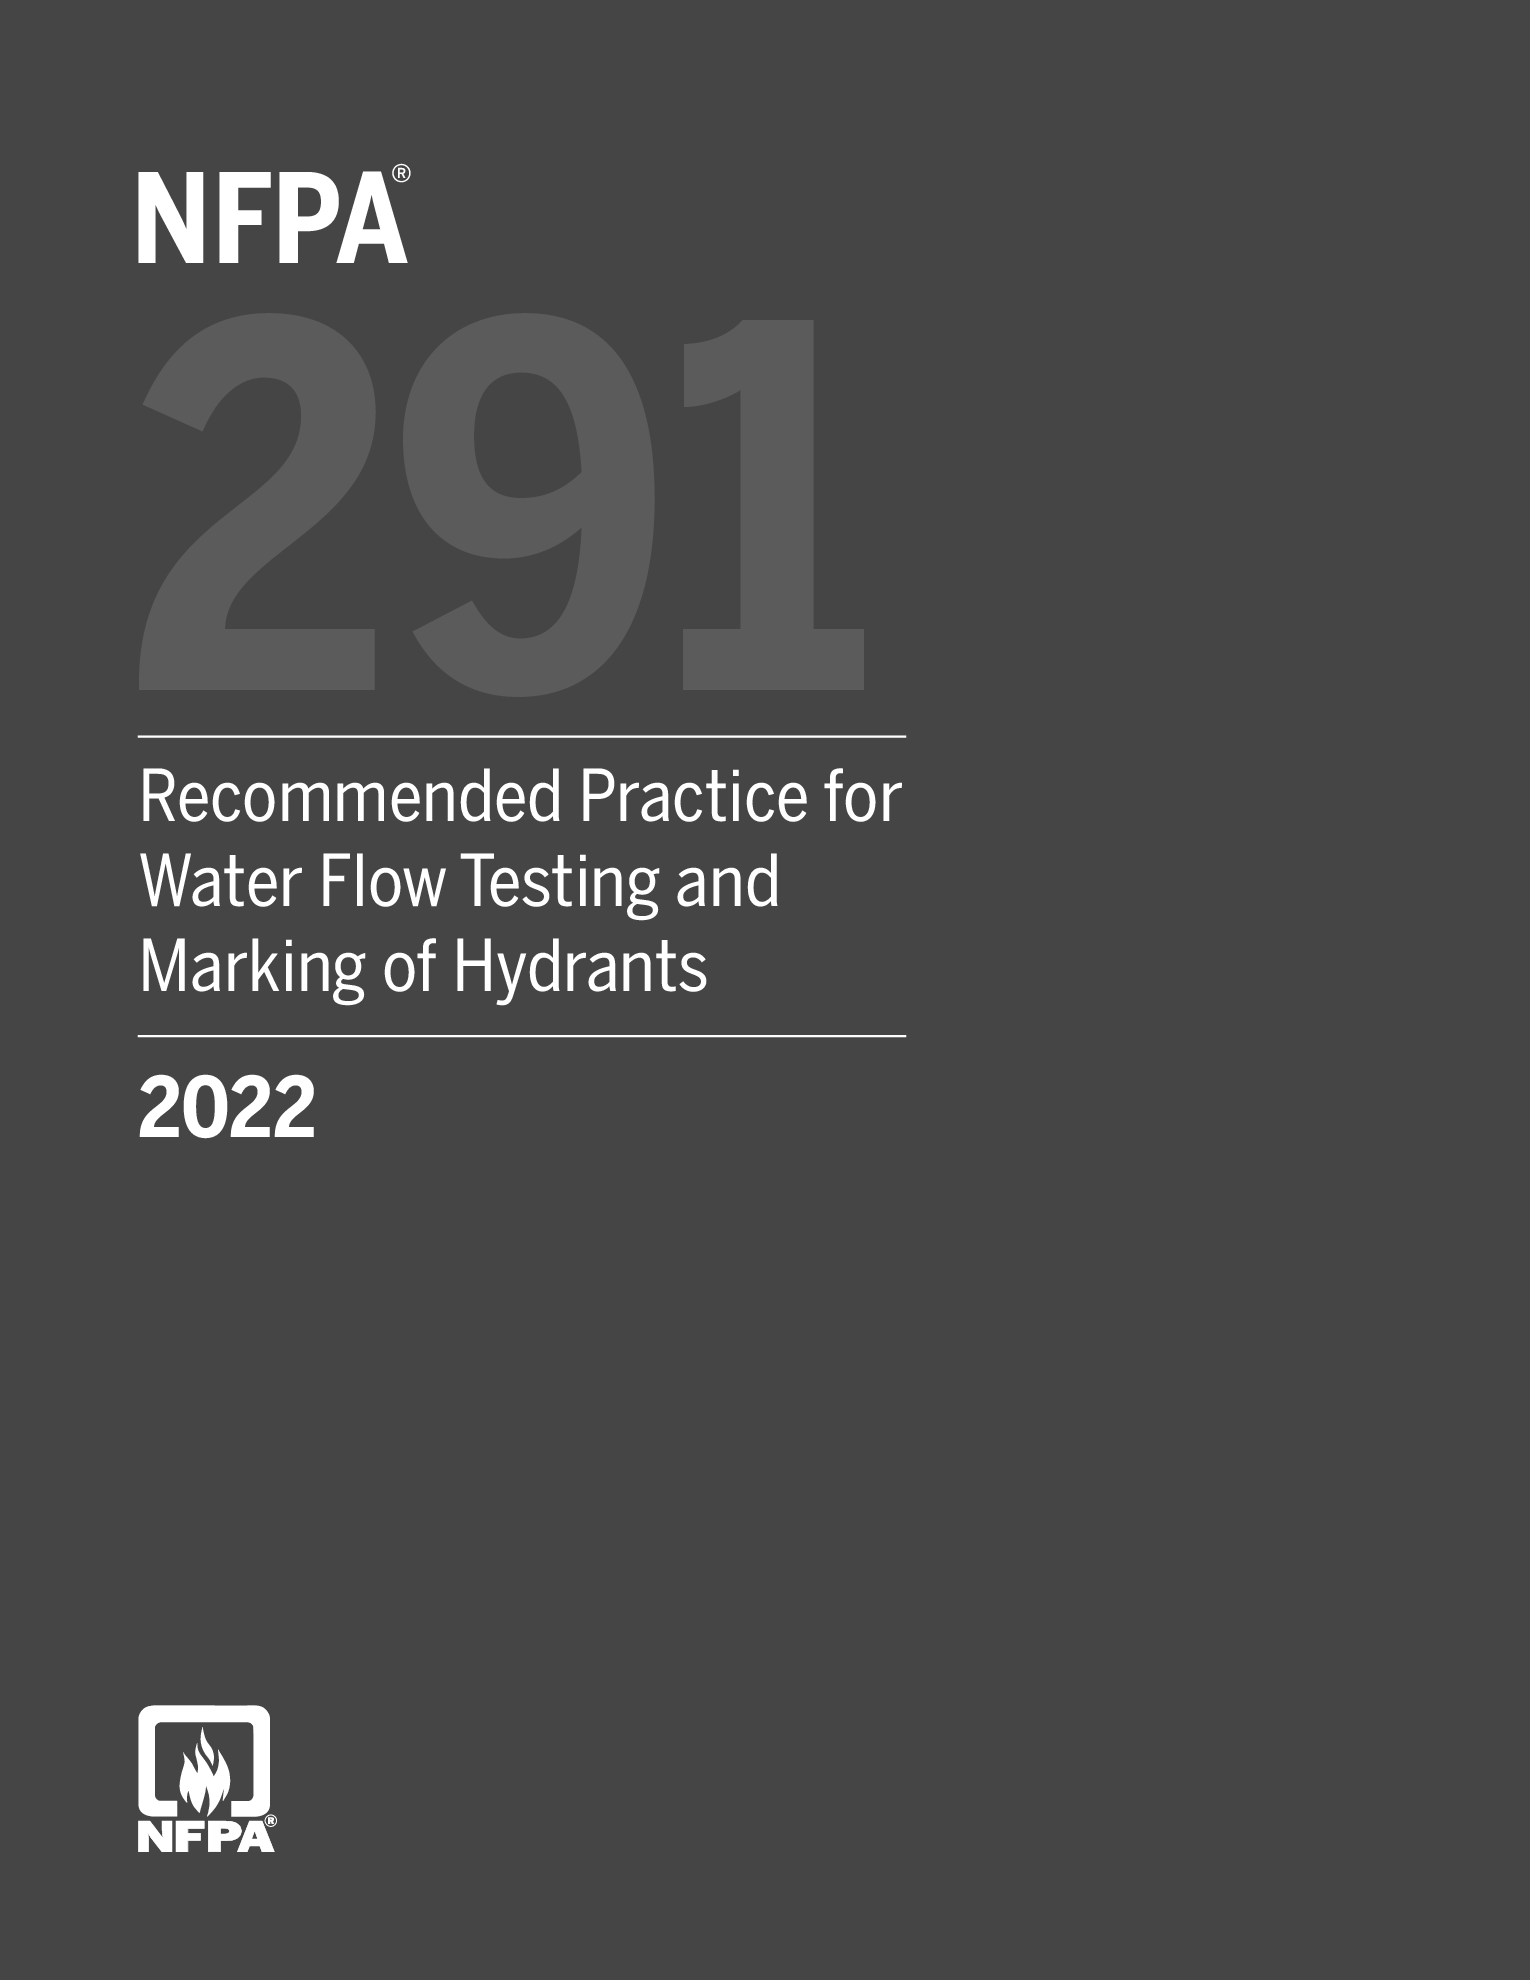 《Recommended Practice for Water Flow Testing and Marking of Hydrants》（NFPA291-2022）【美国消防协会标准】【附完整PDF版下载】